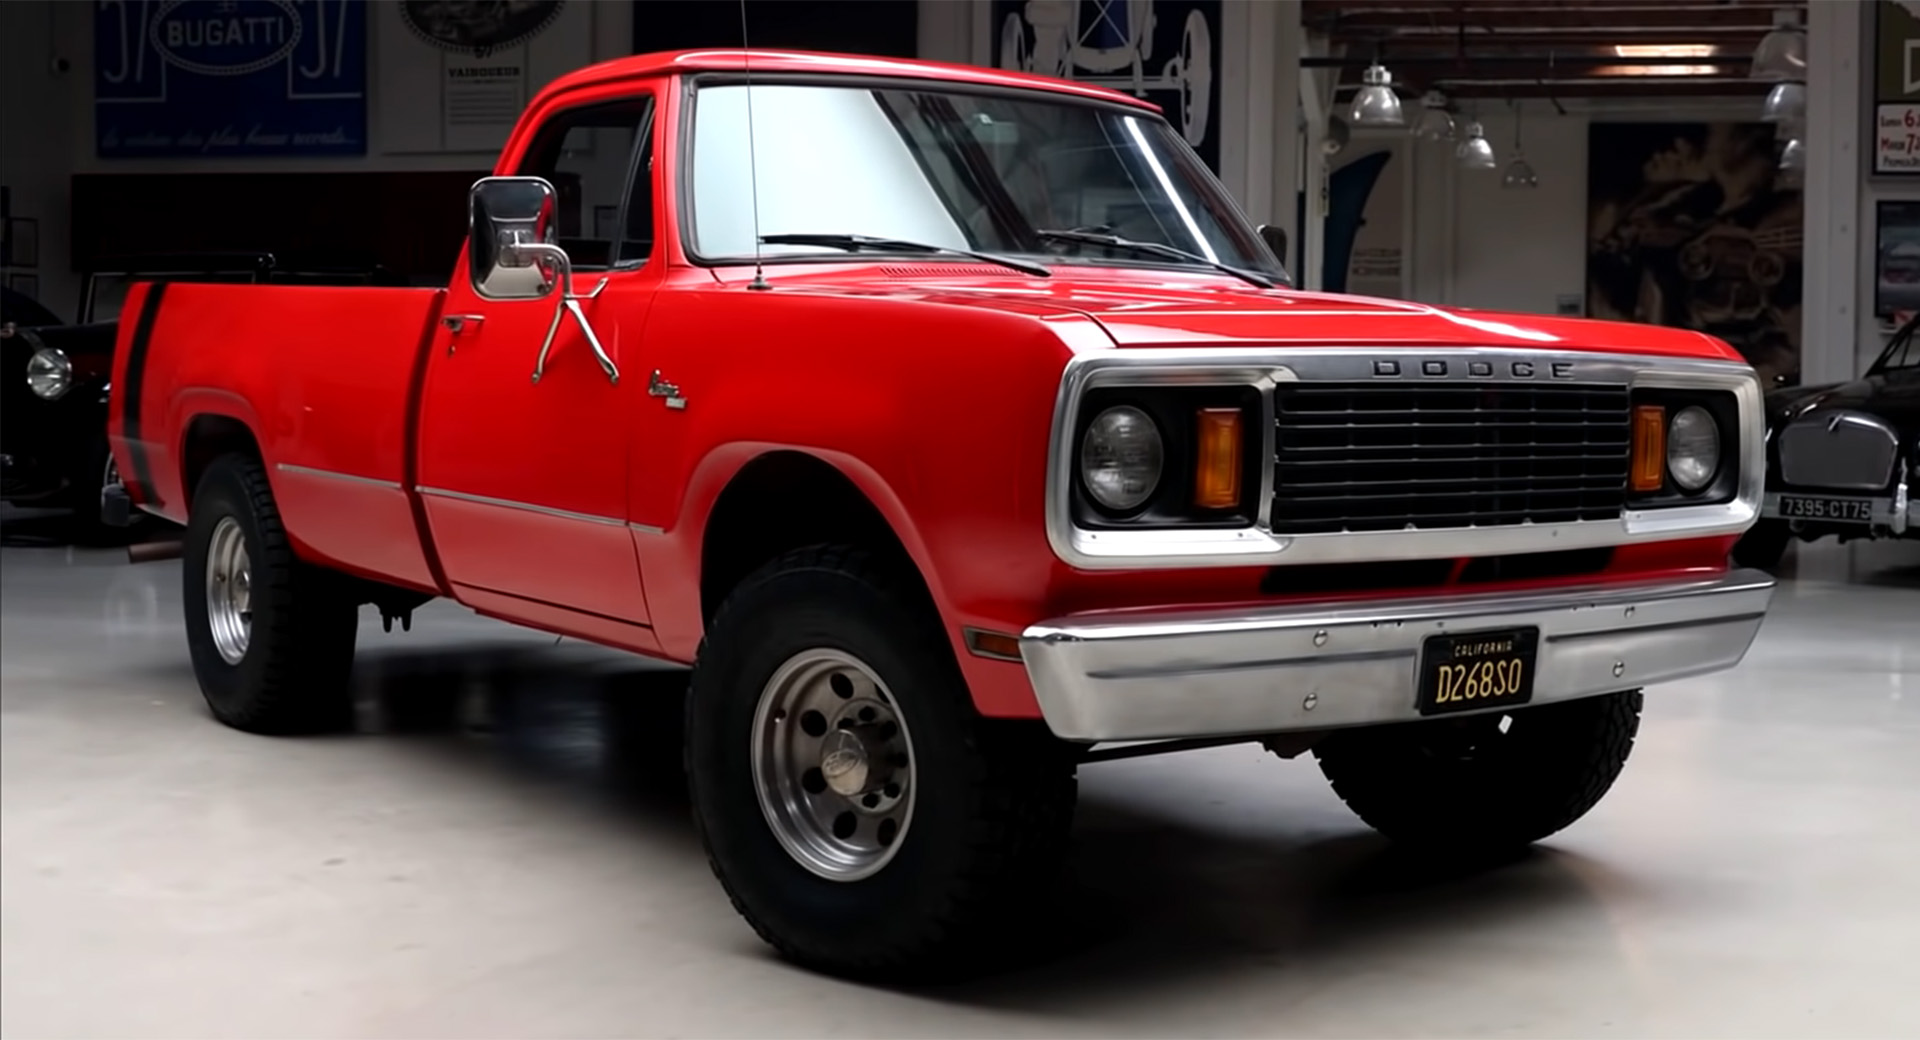 The Story Behind 'Jay Leno's Garage' Collection of Vehicle Care